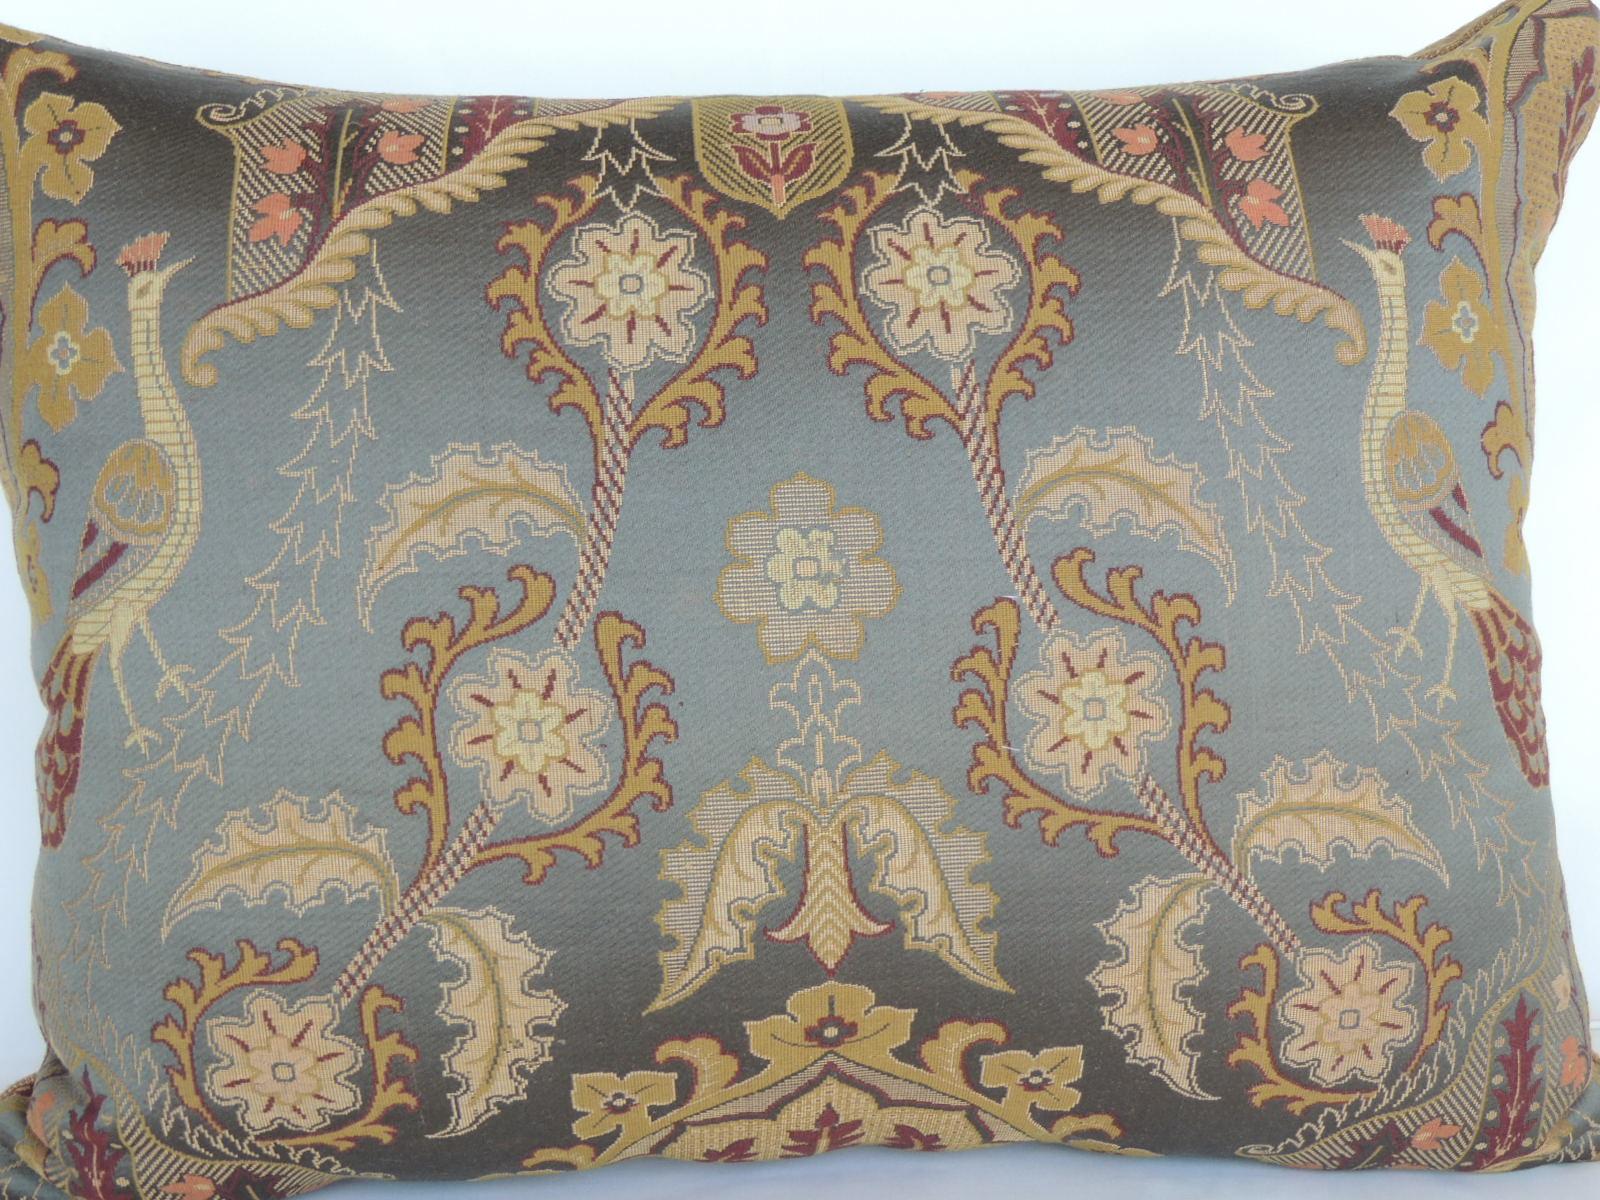 Baroque Large Vintage Blue and Gold Silk Peacocks Decorative Bolster Pillow